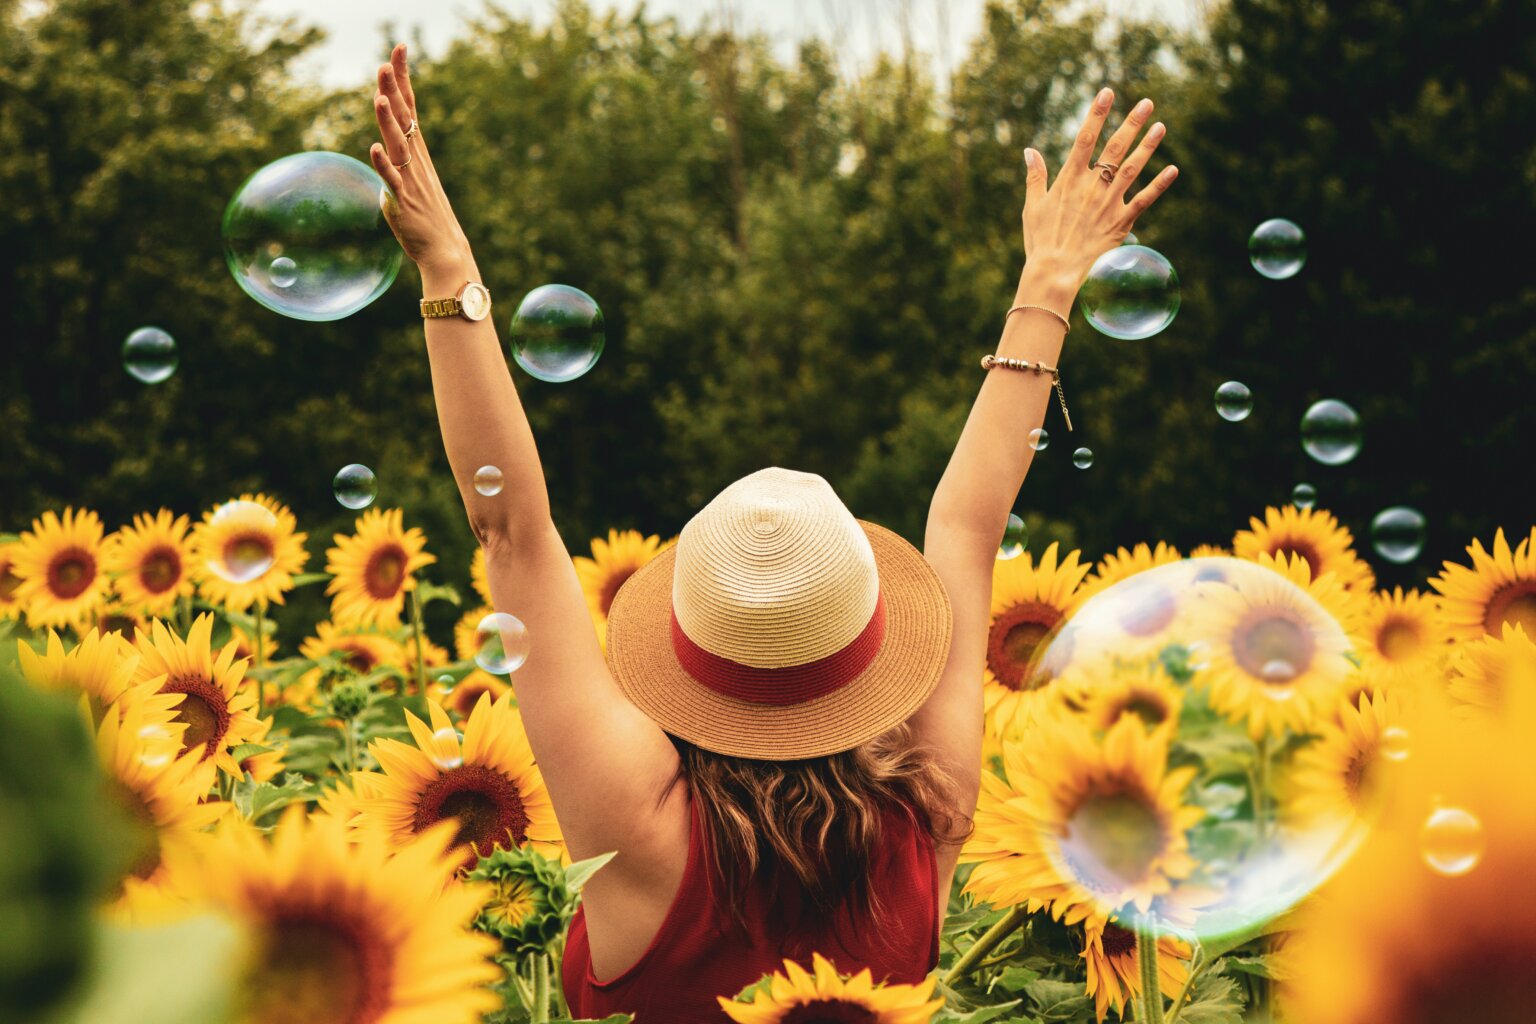 Woman dancing in a field of sunflowers and bubbles.